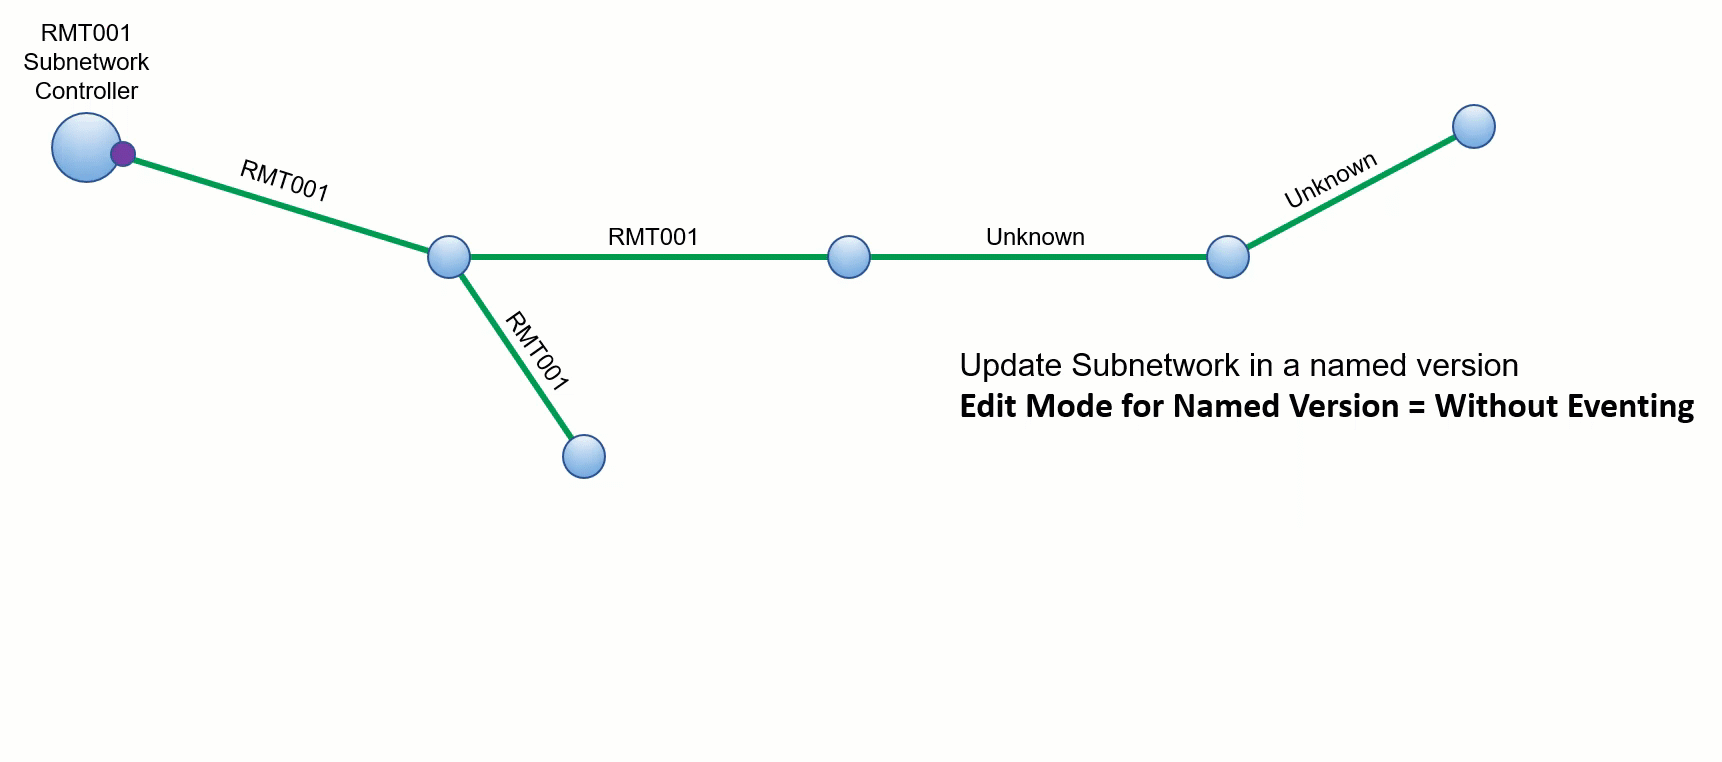 Example of update subnetwork operation run in a named version using the default option of Without Eventing for Edit Mode for Named Version.